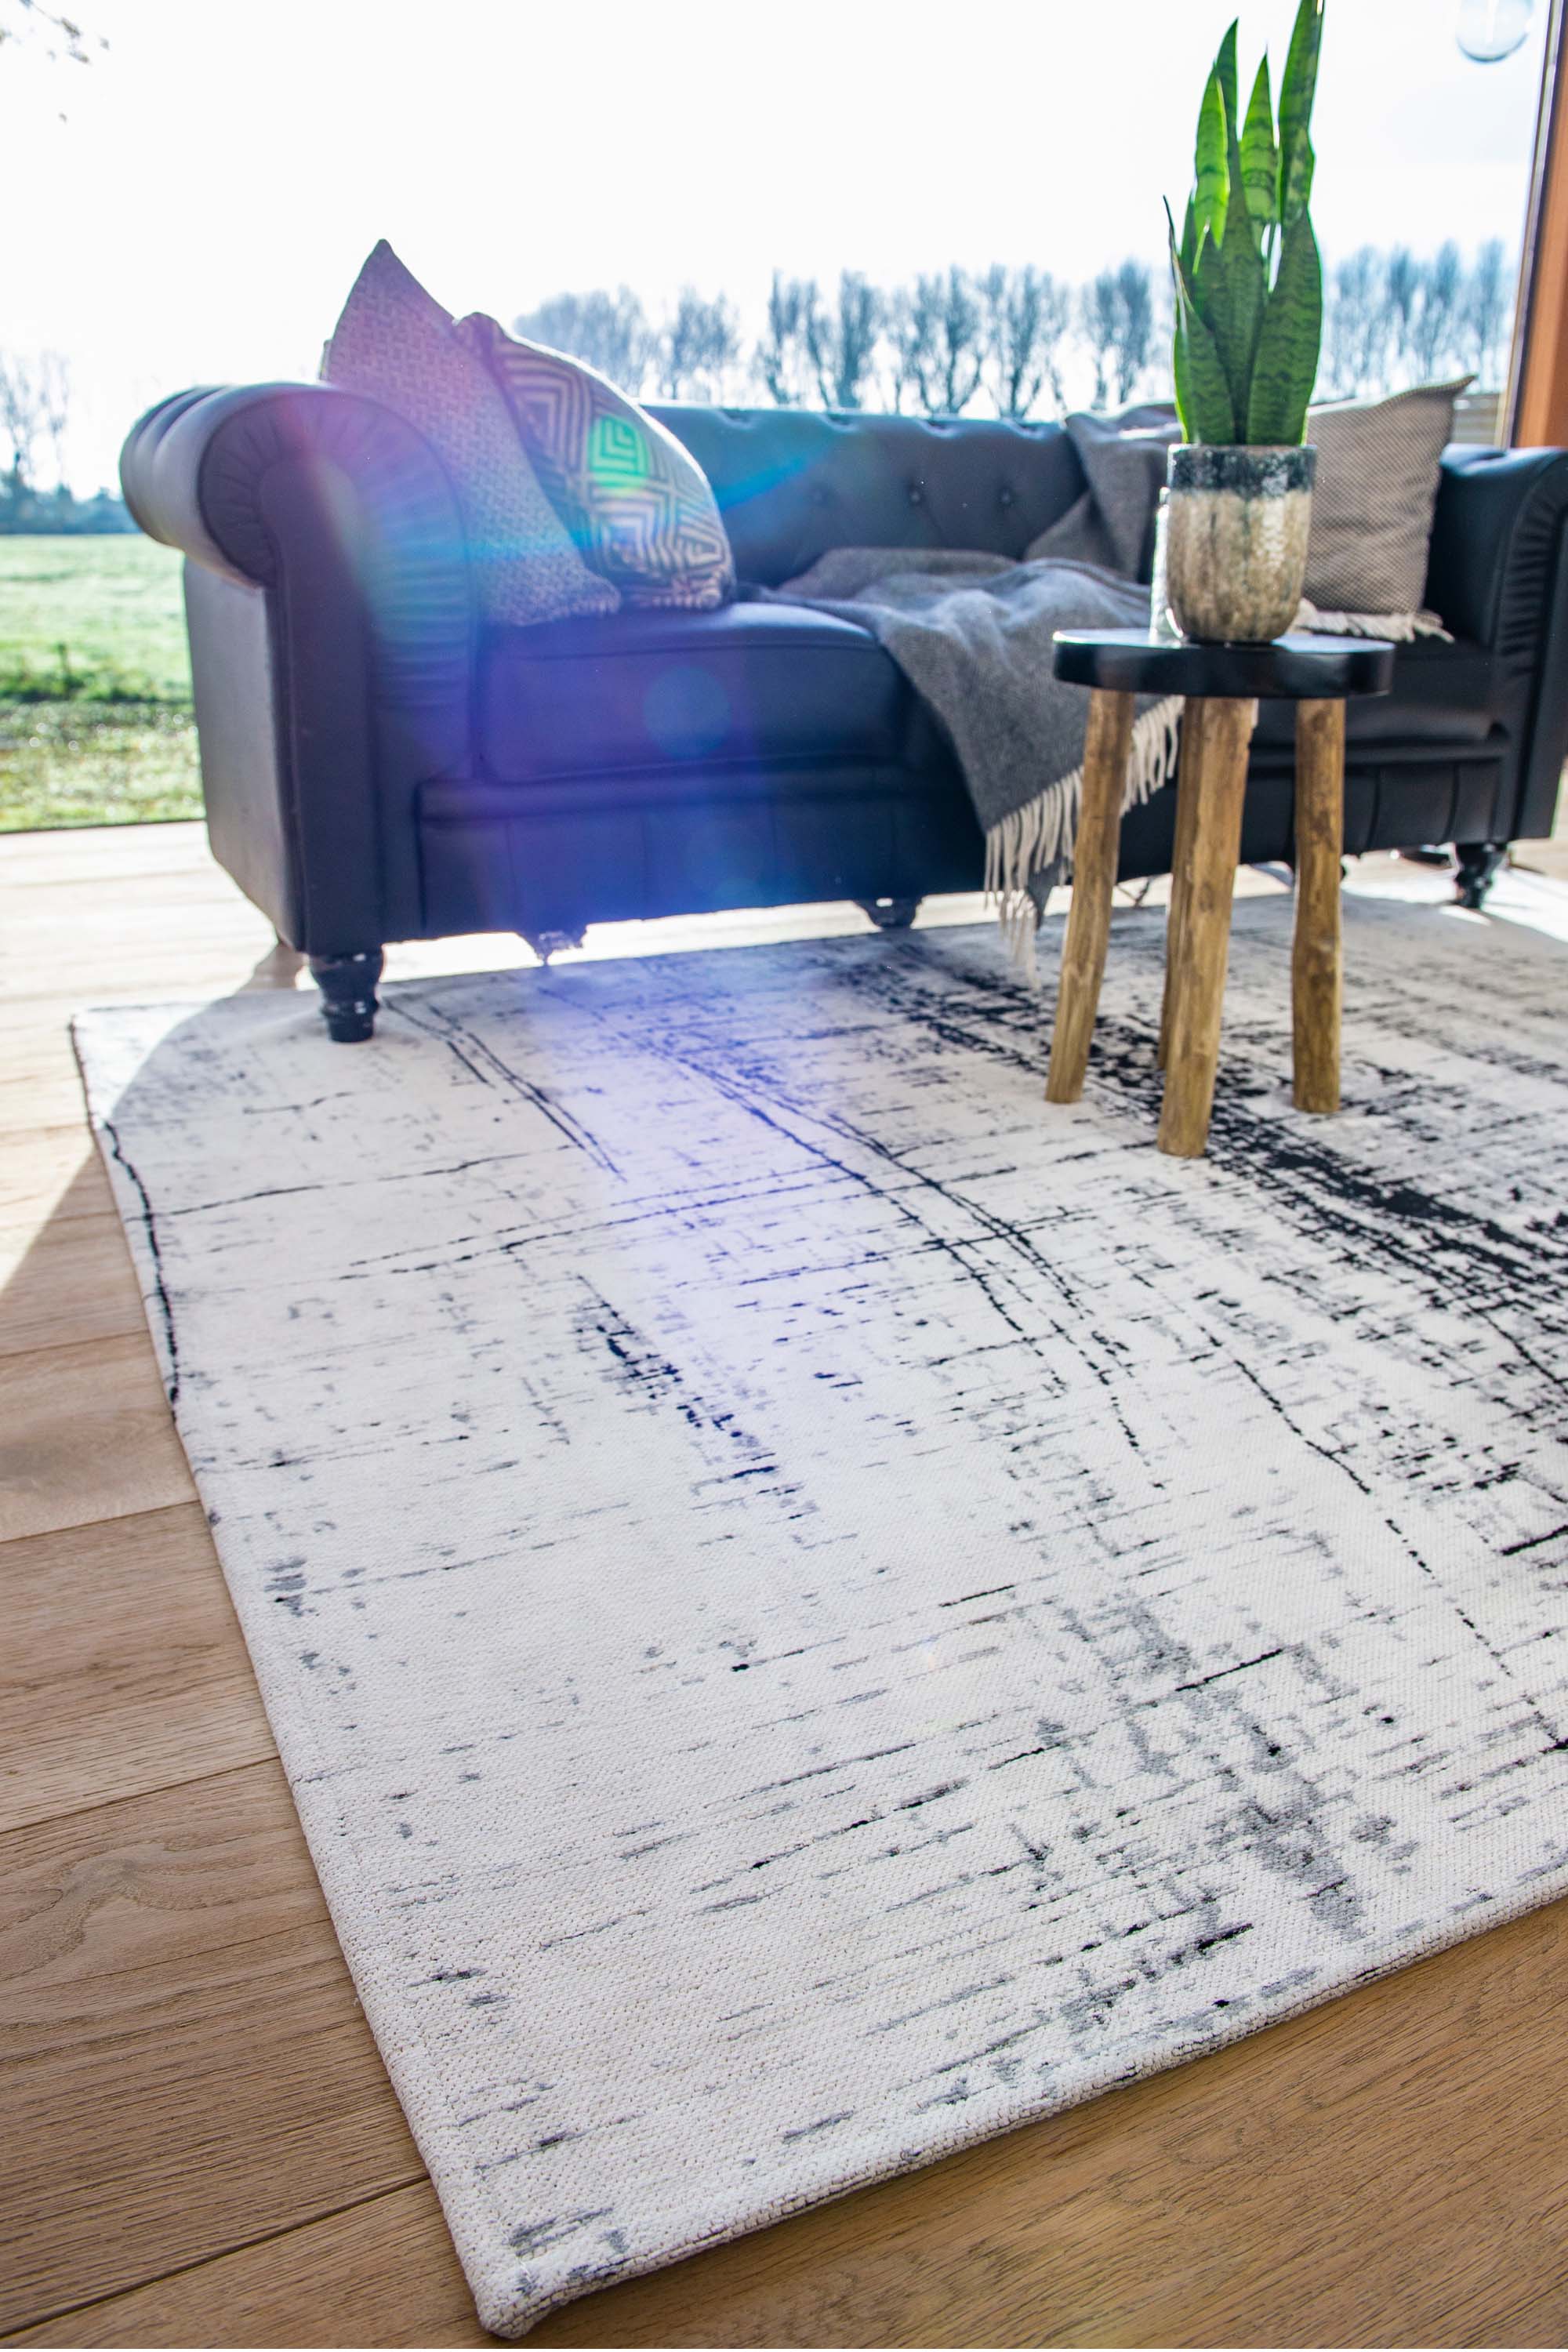 White flatweave rug with grey and black abstract pattern